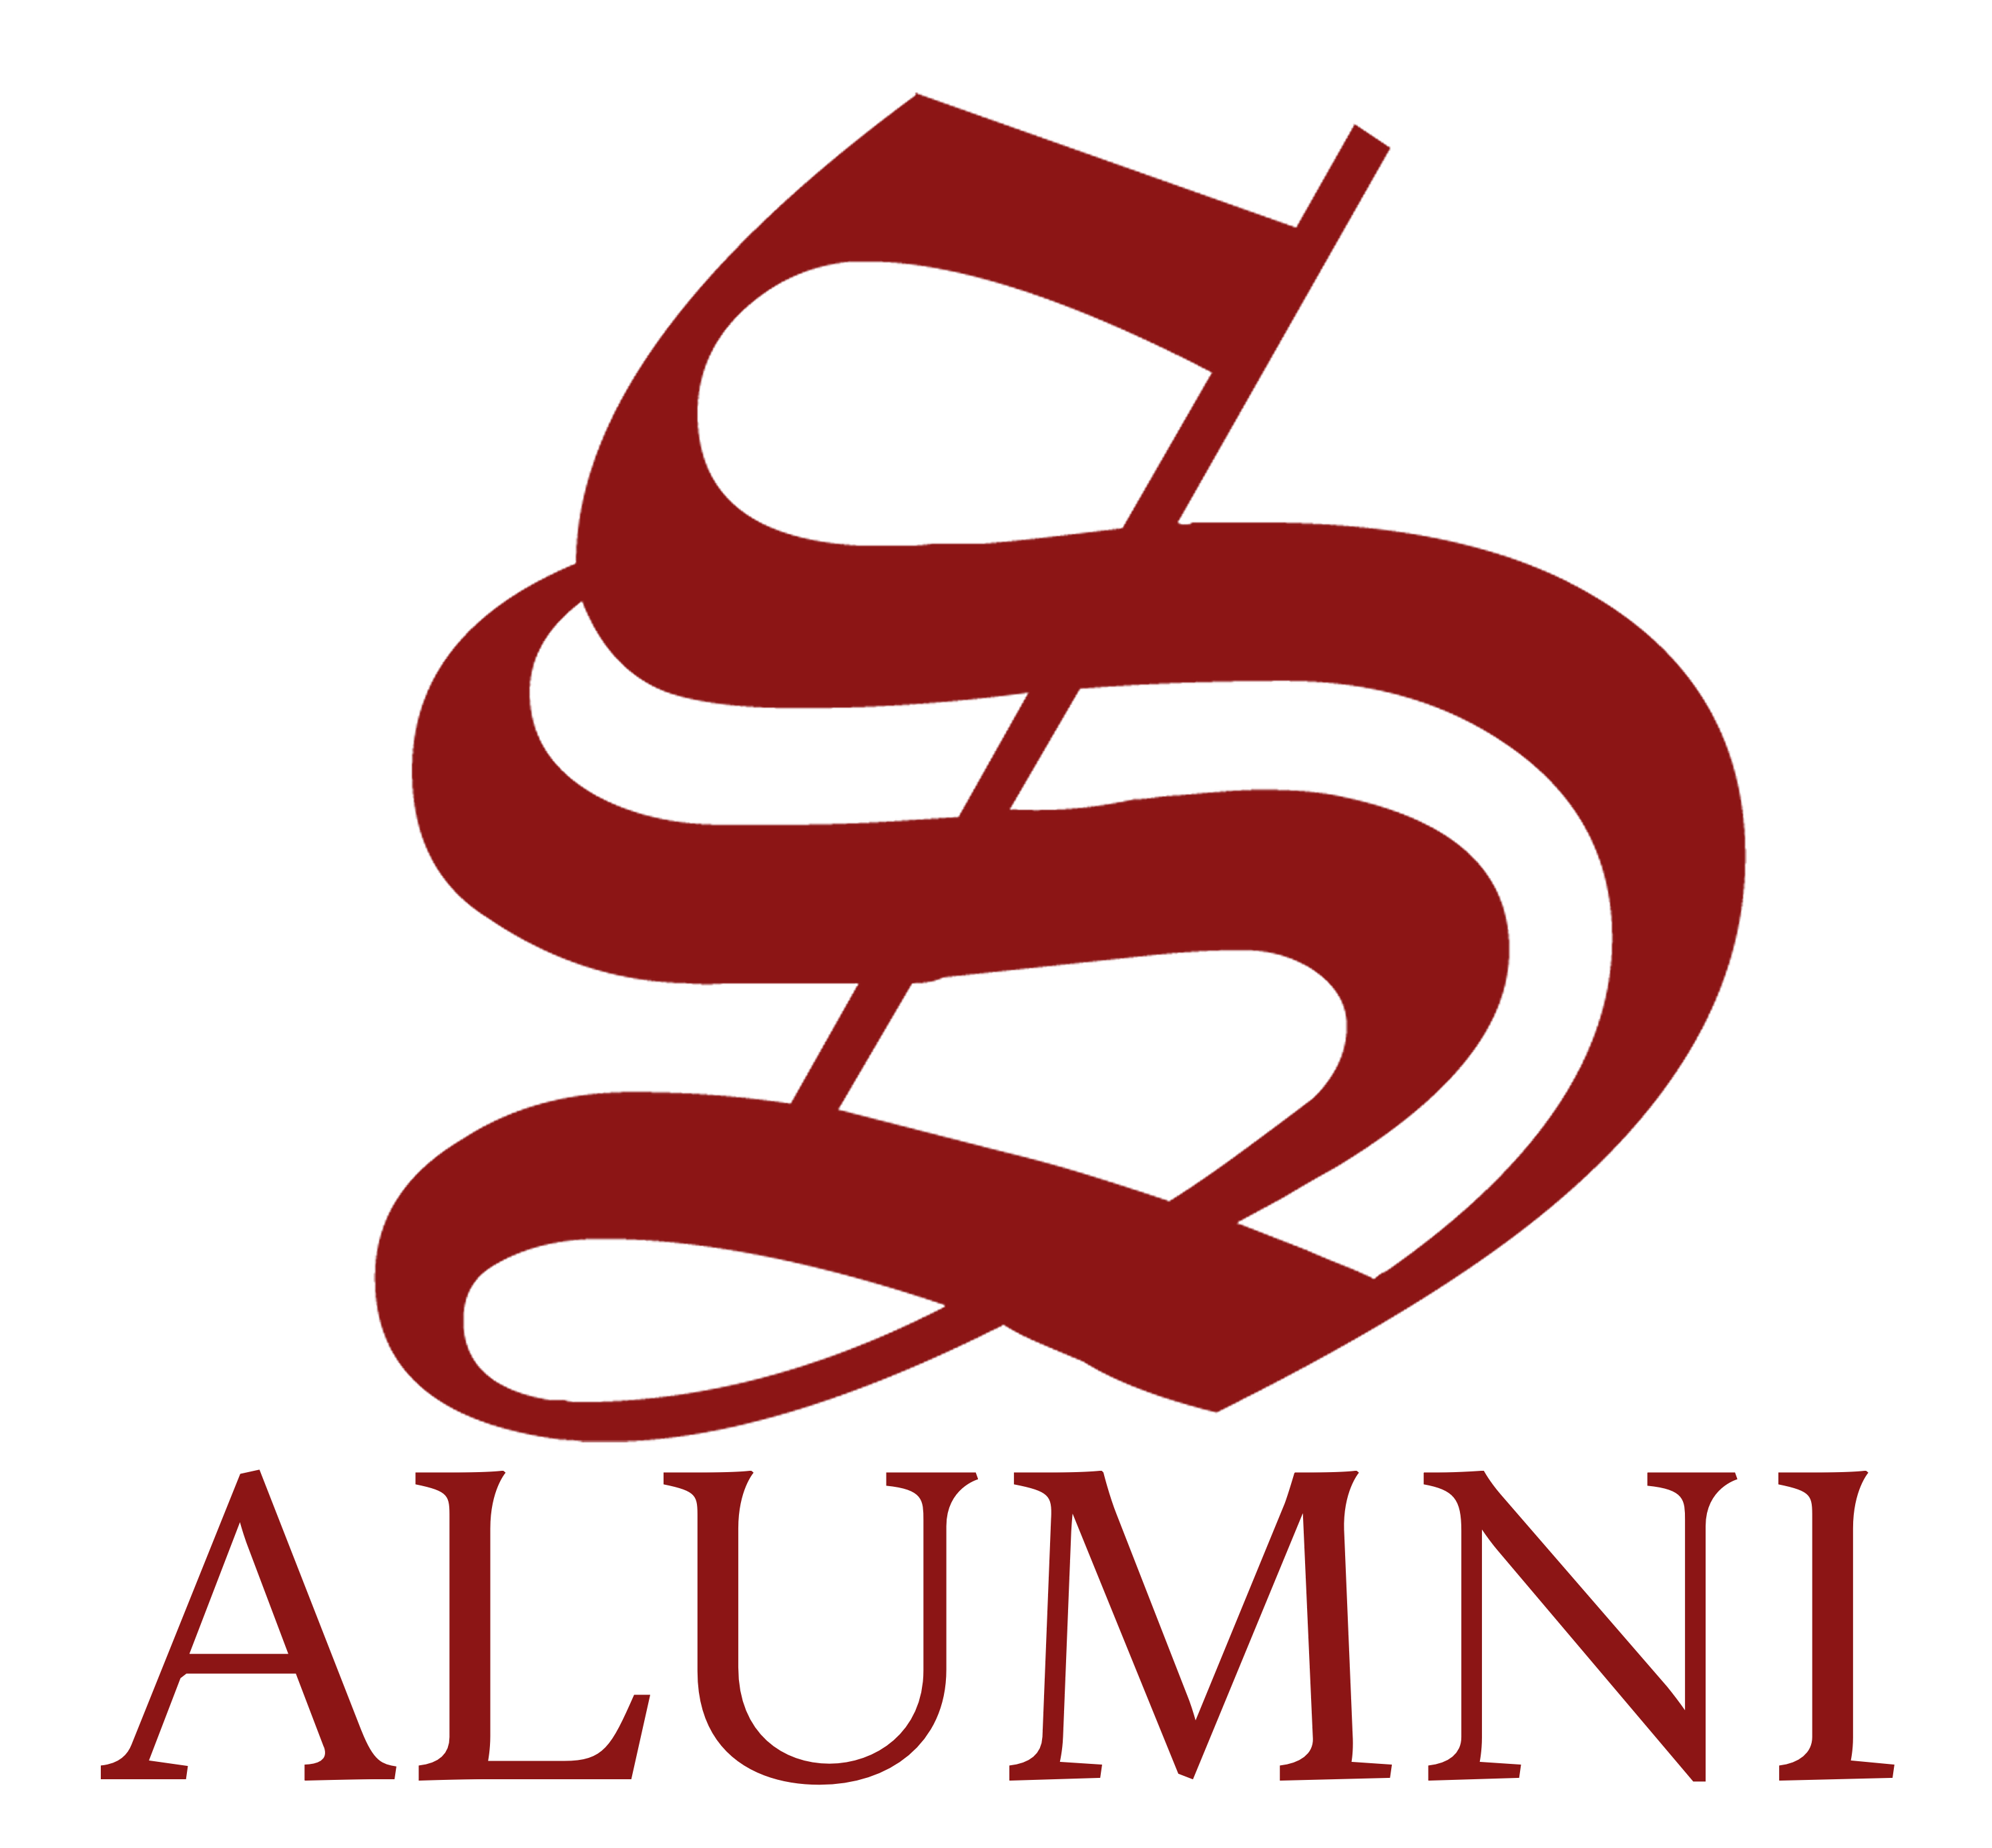 The Stanford Daily logo with "ALUMNI" beneath